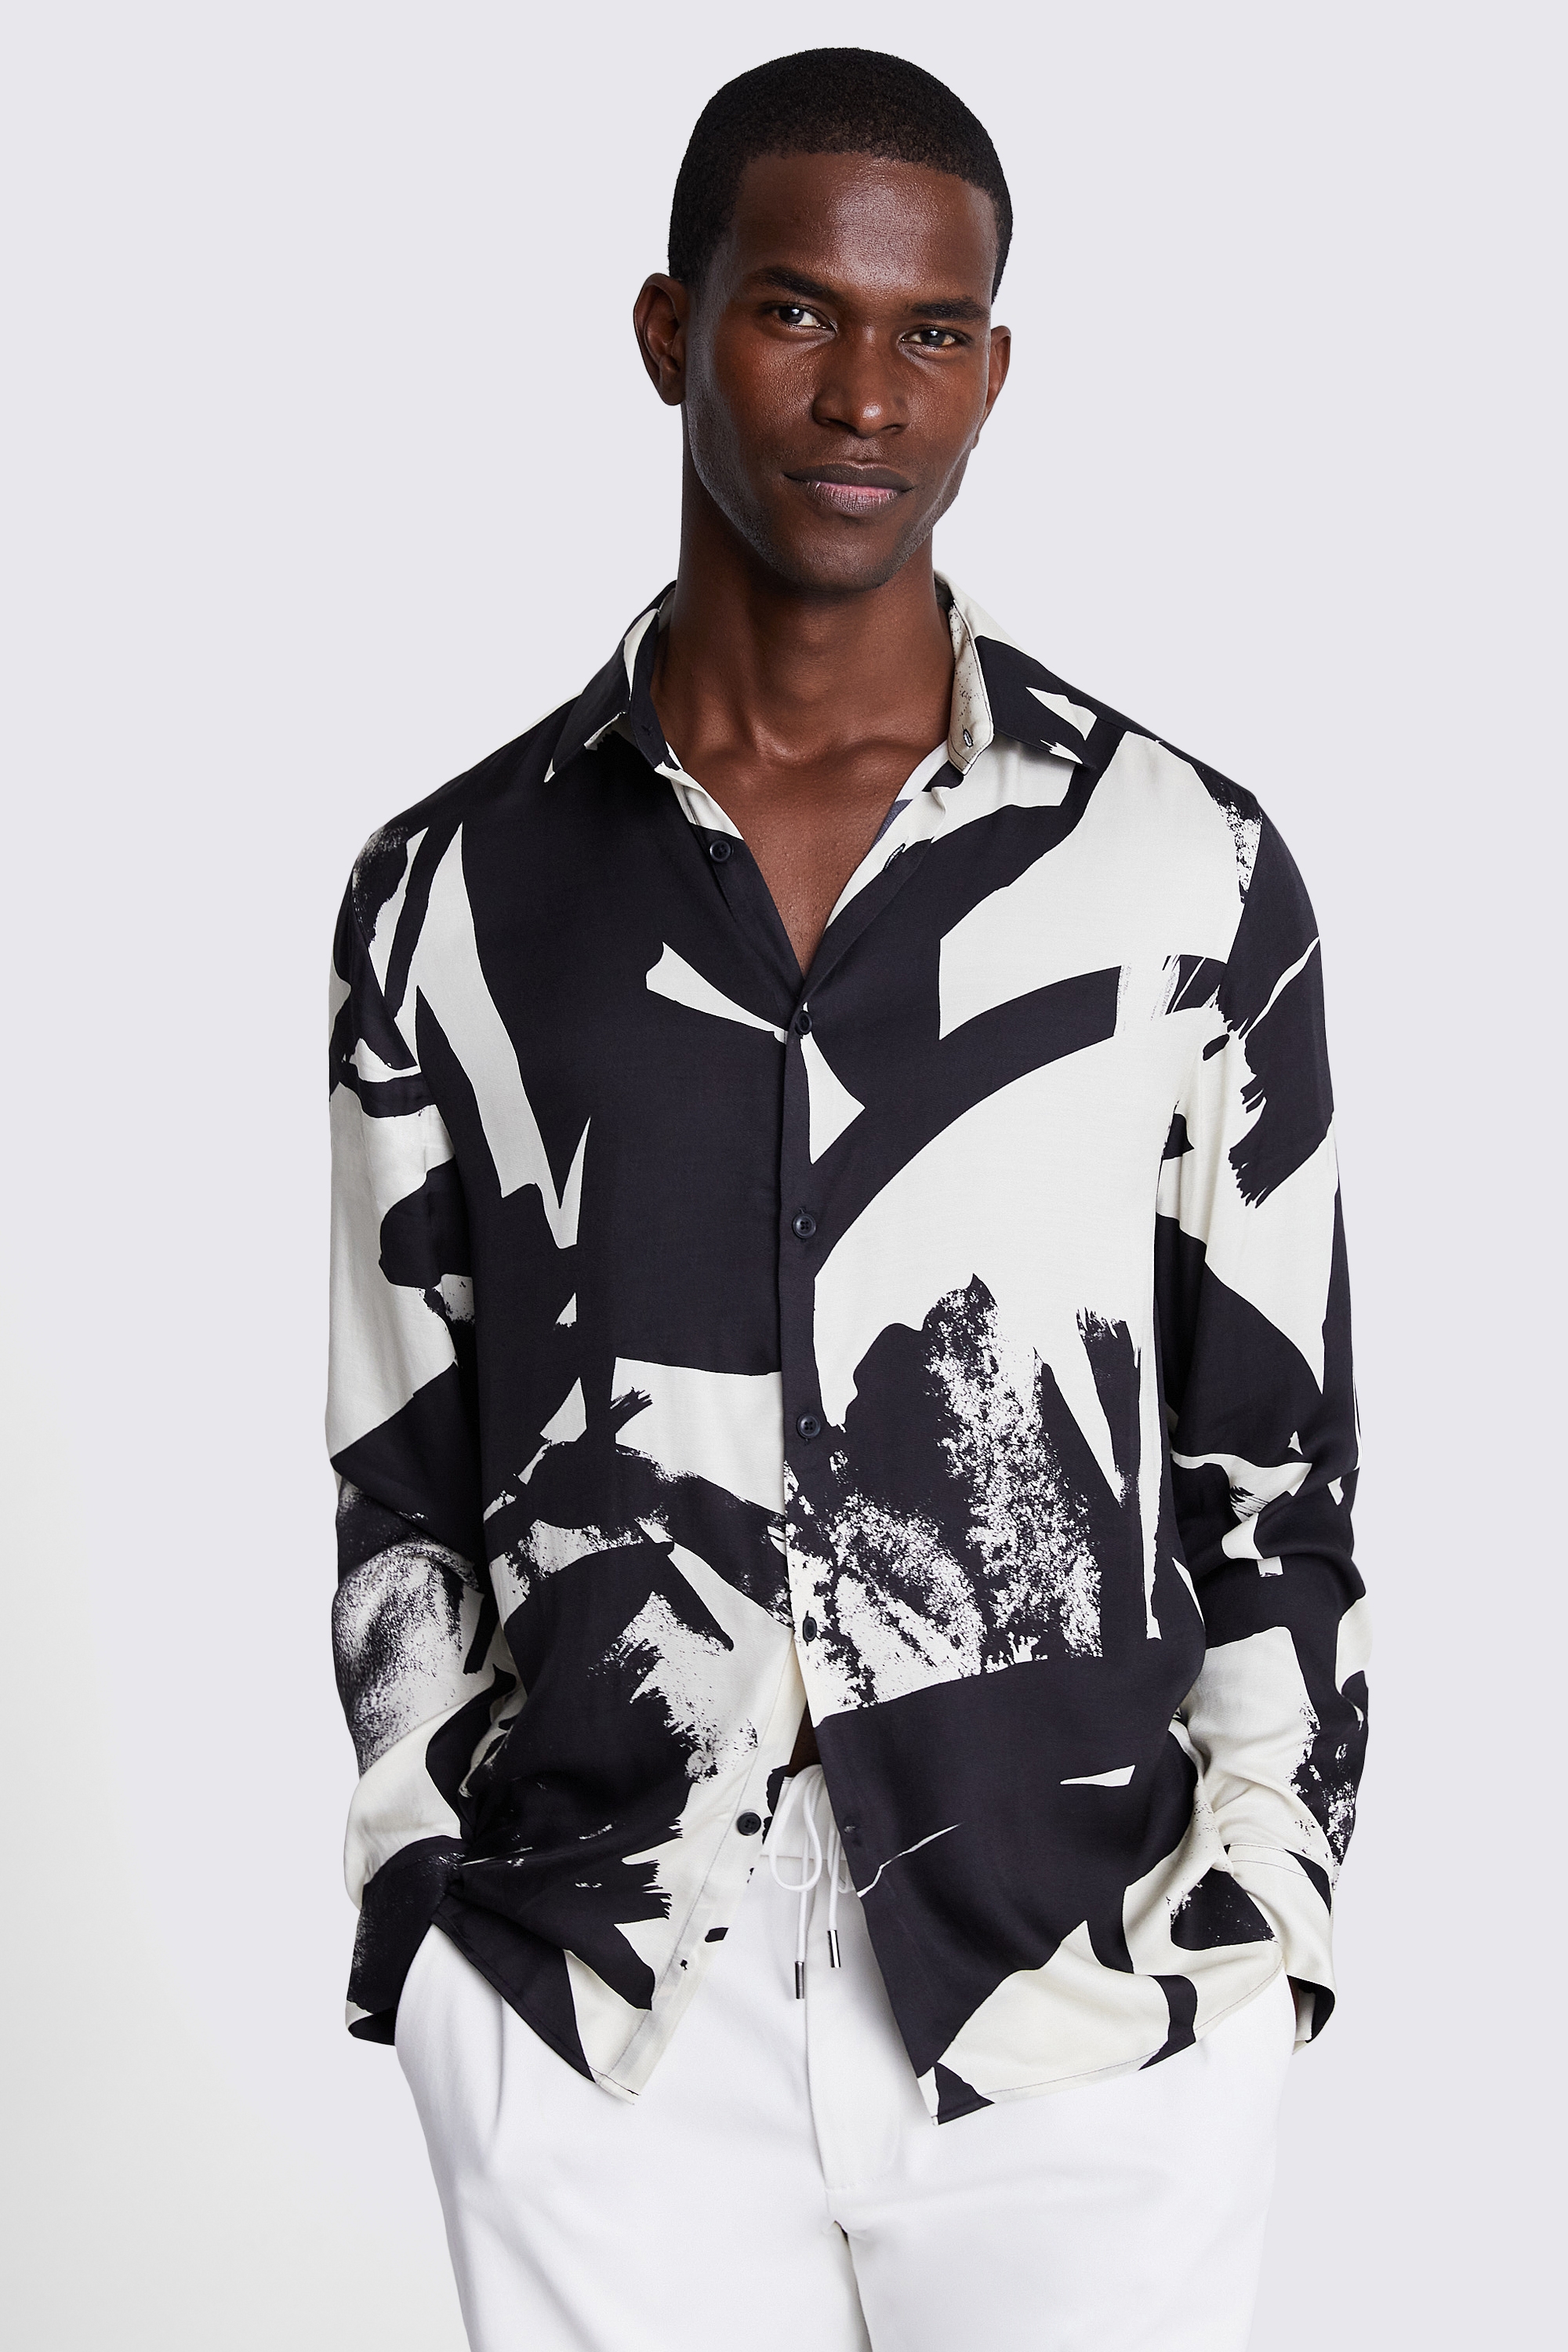 Off White & Black Abstract Printed Shirt | Buy Online at Moss